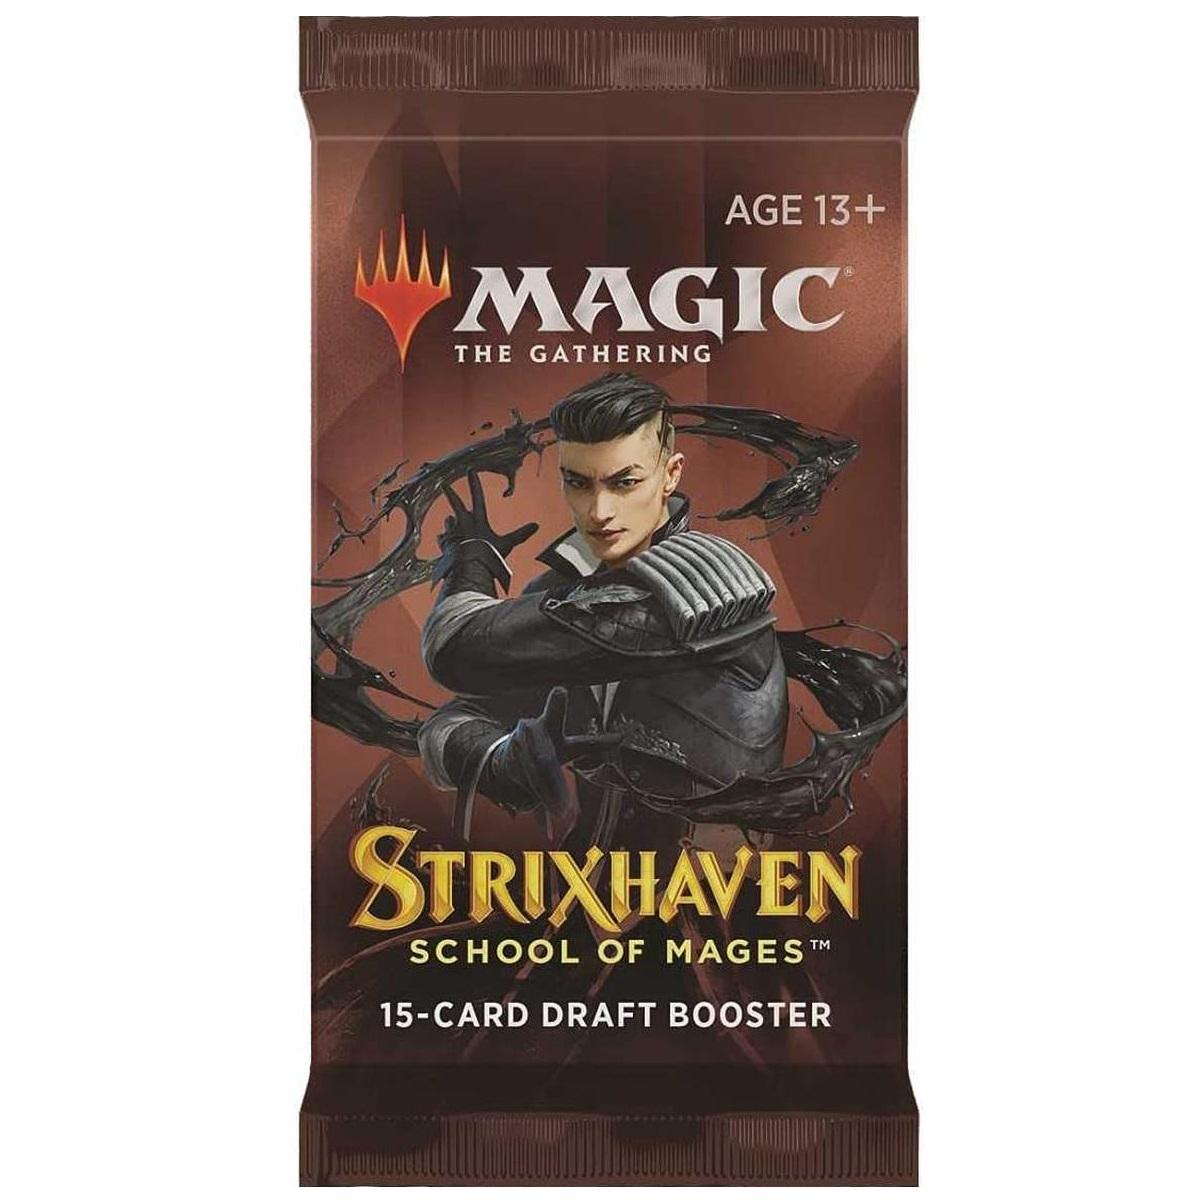 Magic: The Gathering Strixhaven School of Mages Draft Booster (Single Pack)